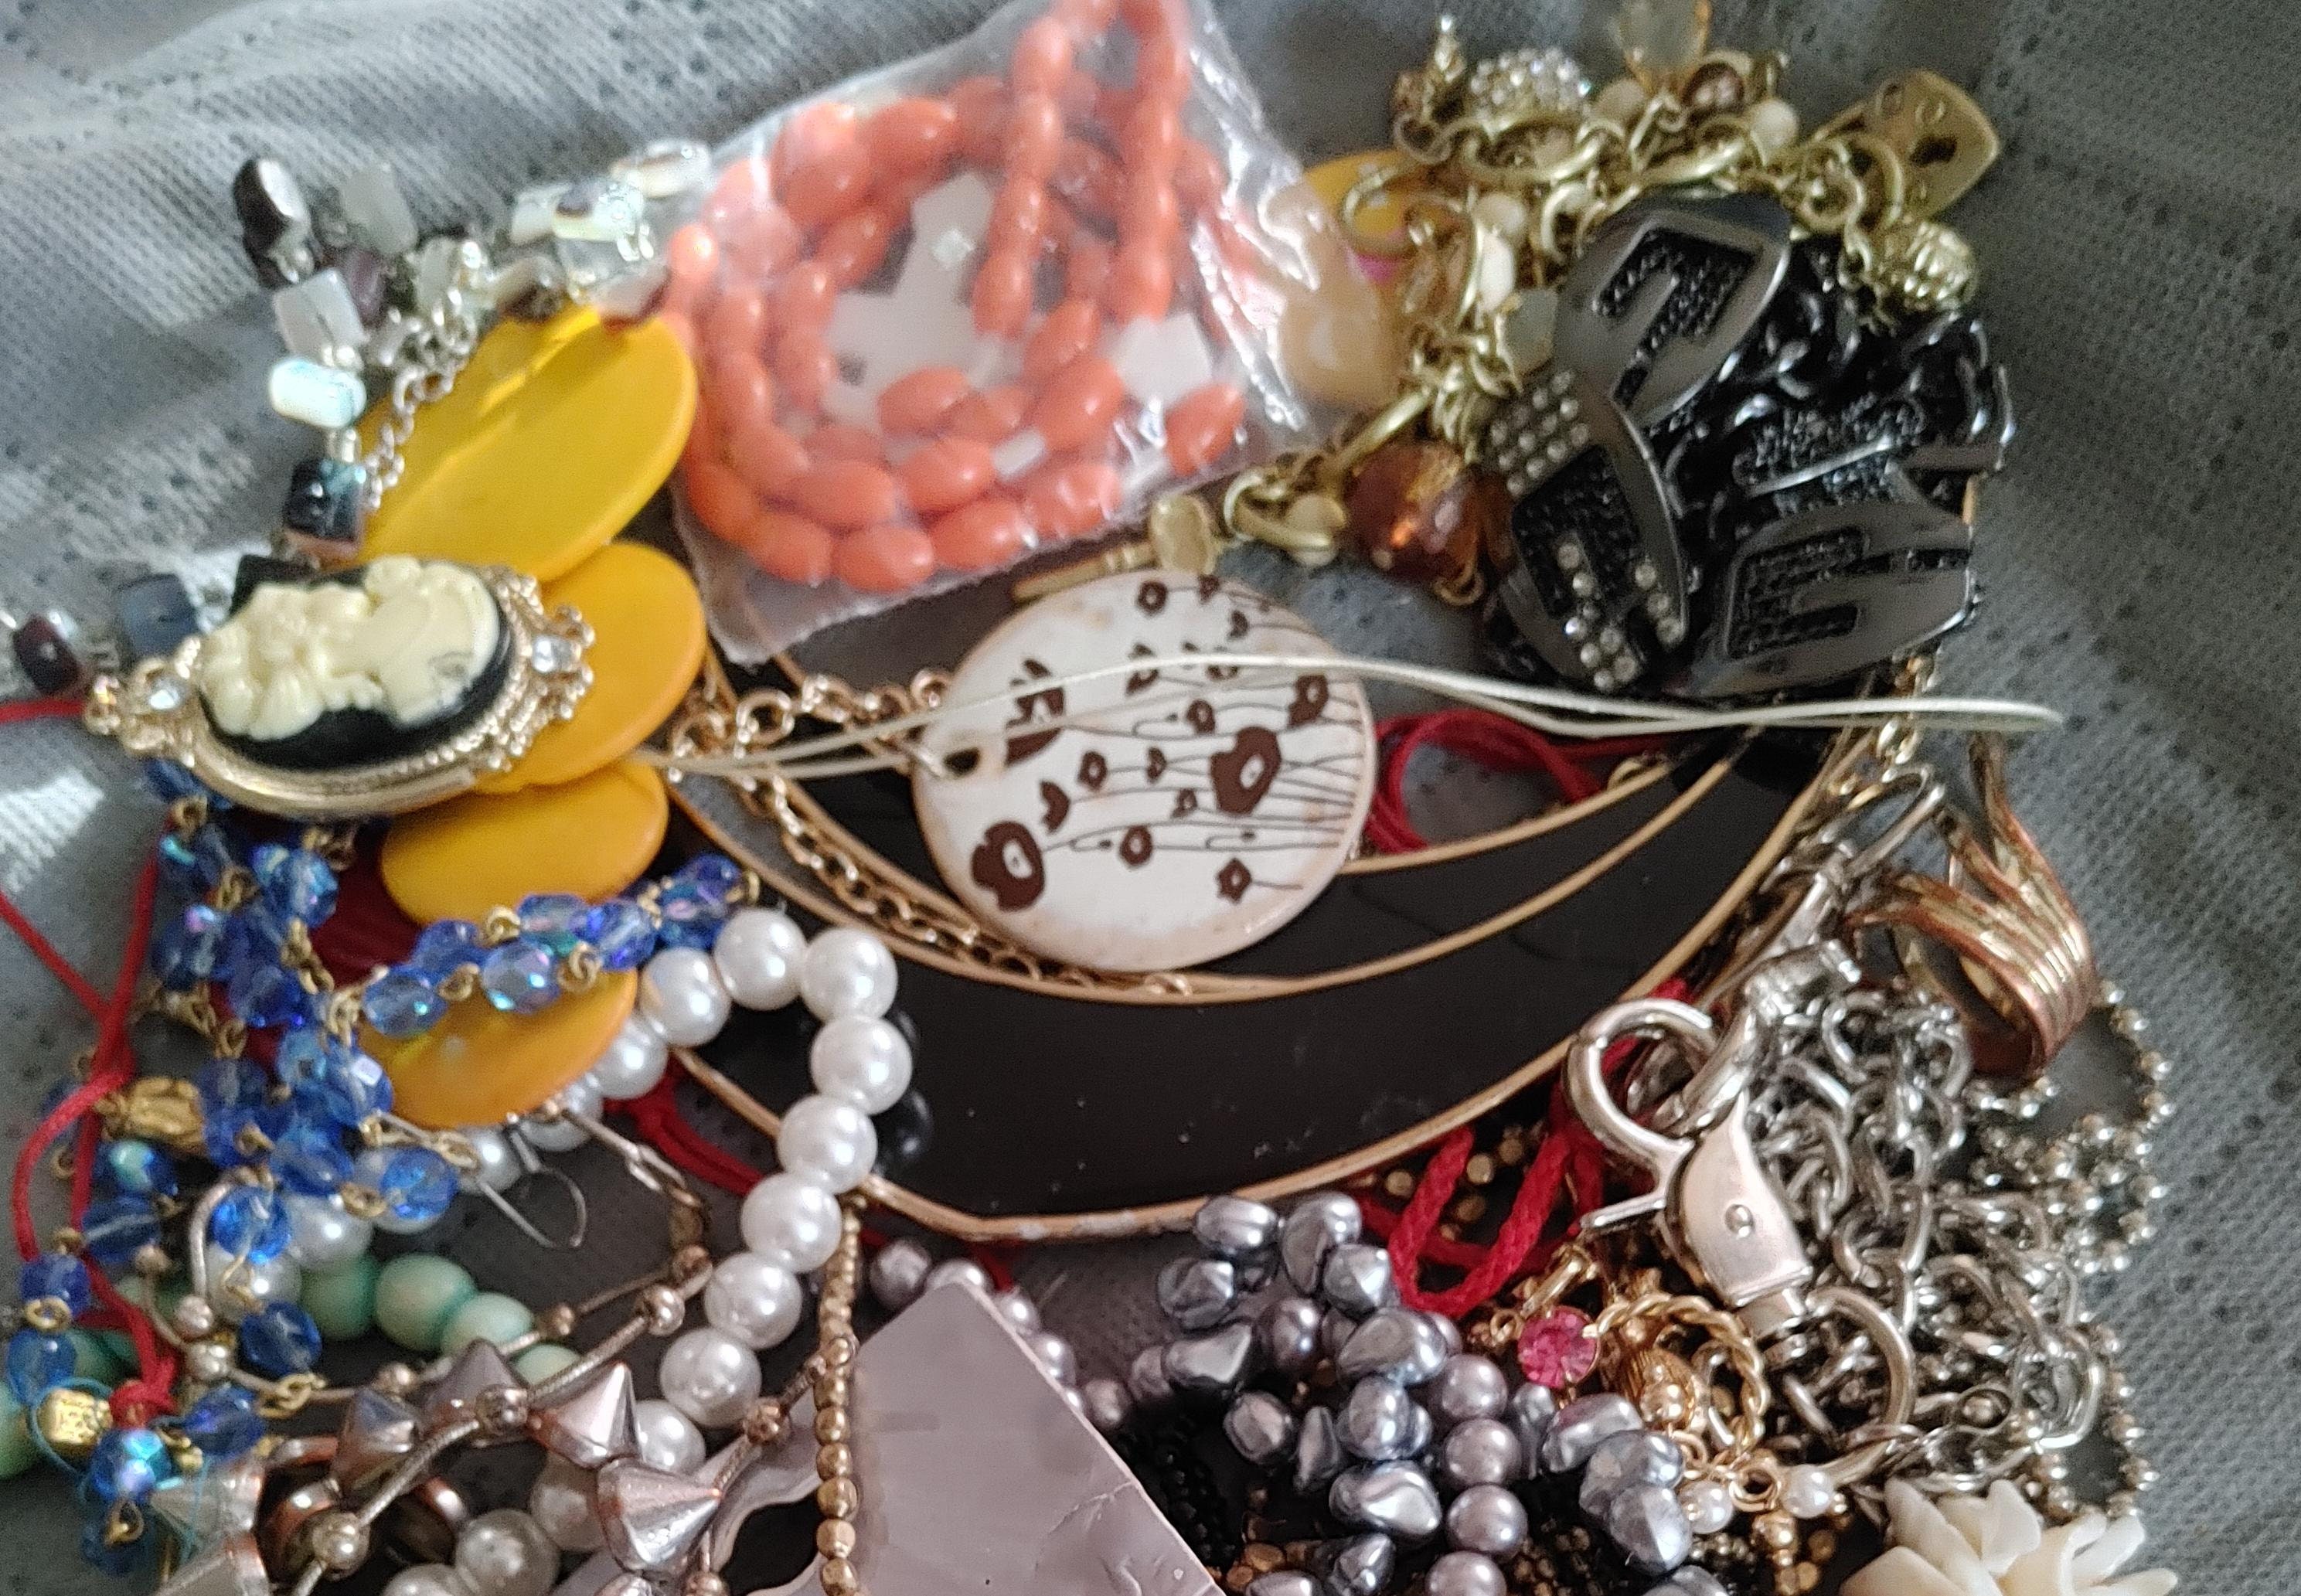 Large Bulk Lot of Jewelry Crafting or wear 3.5 LB J004 | Etsy